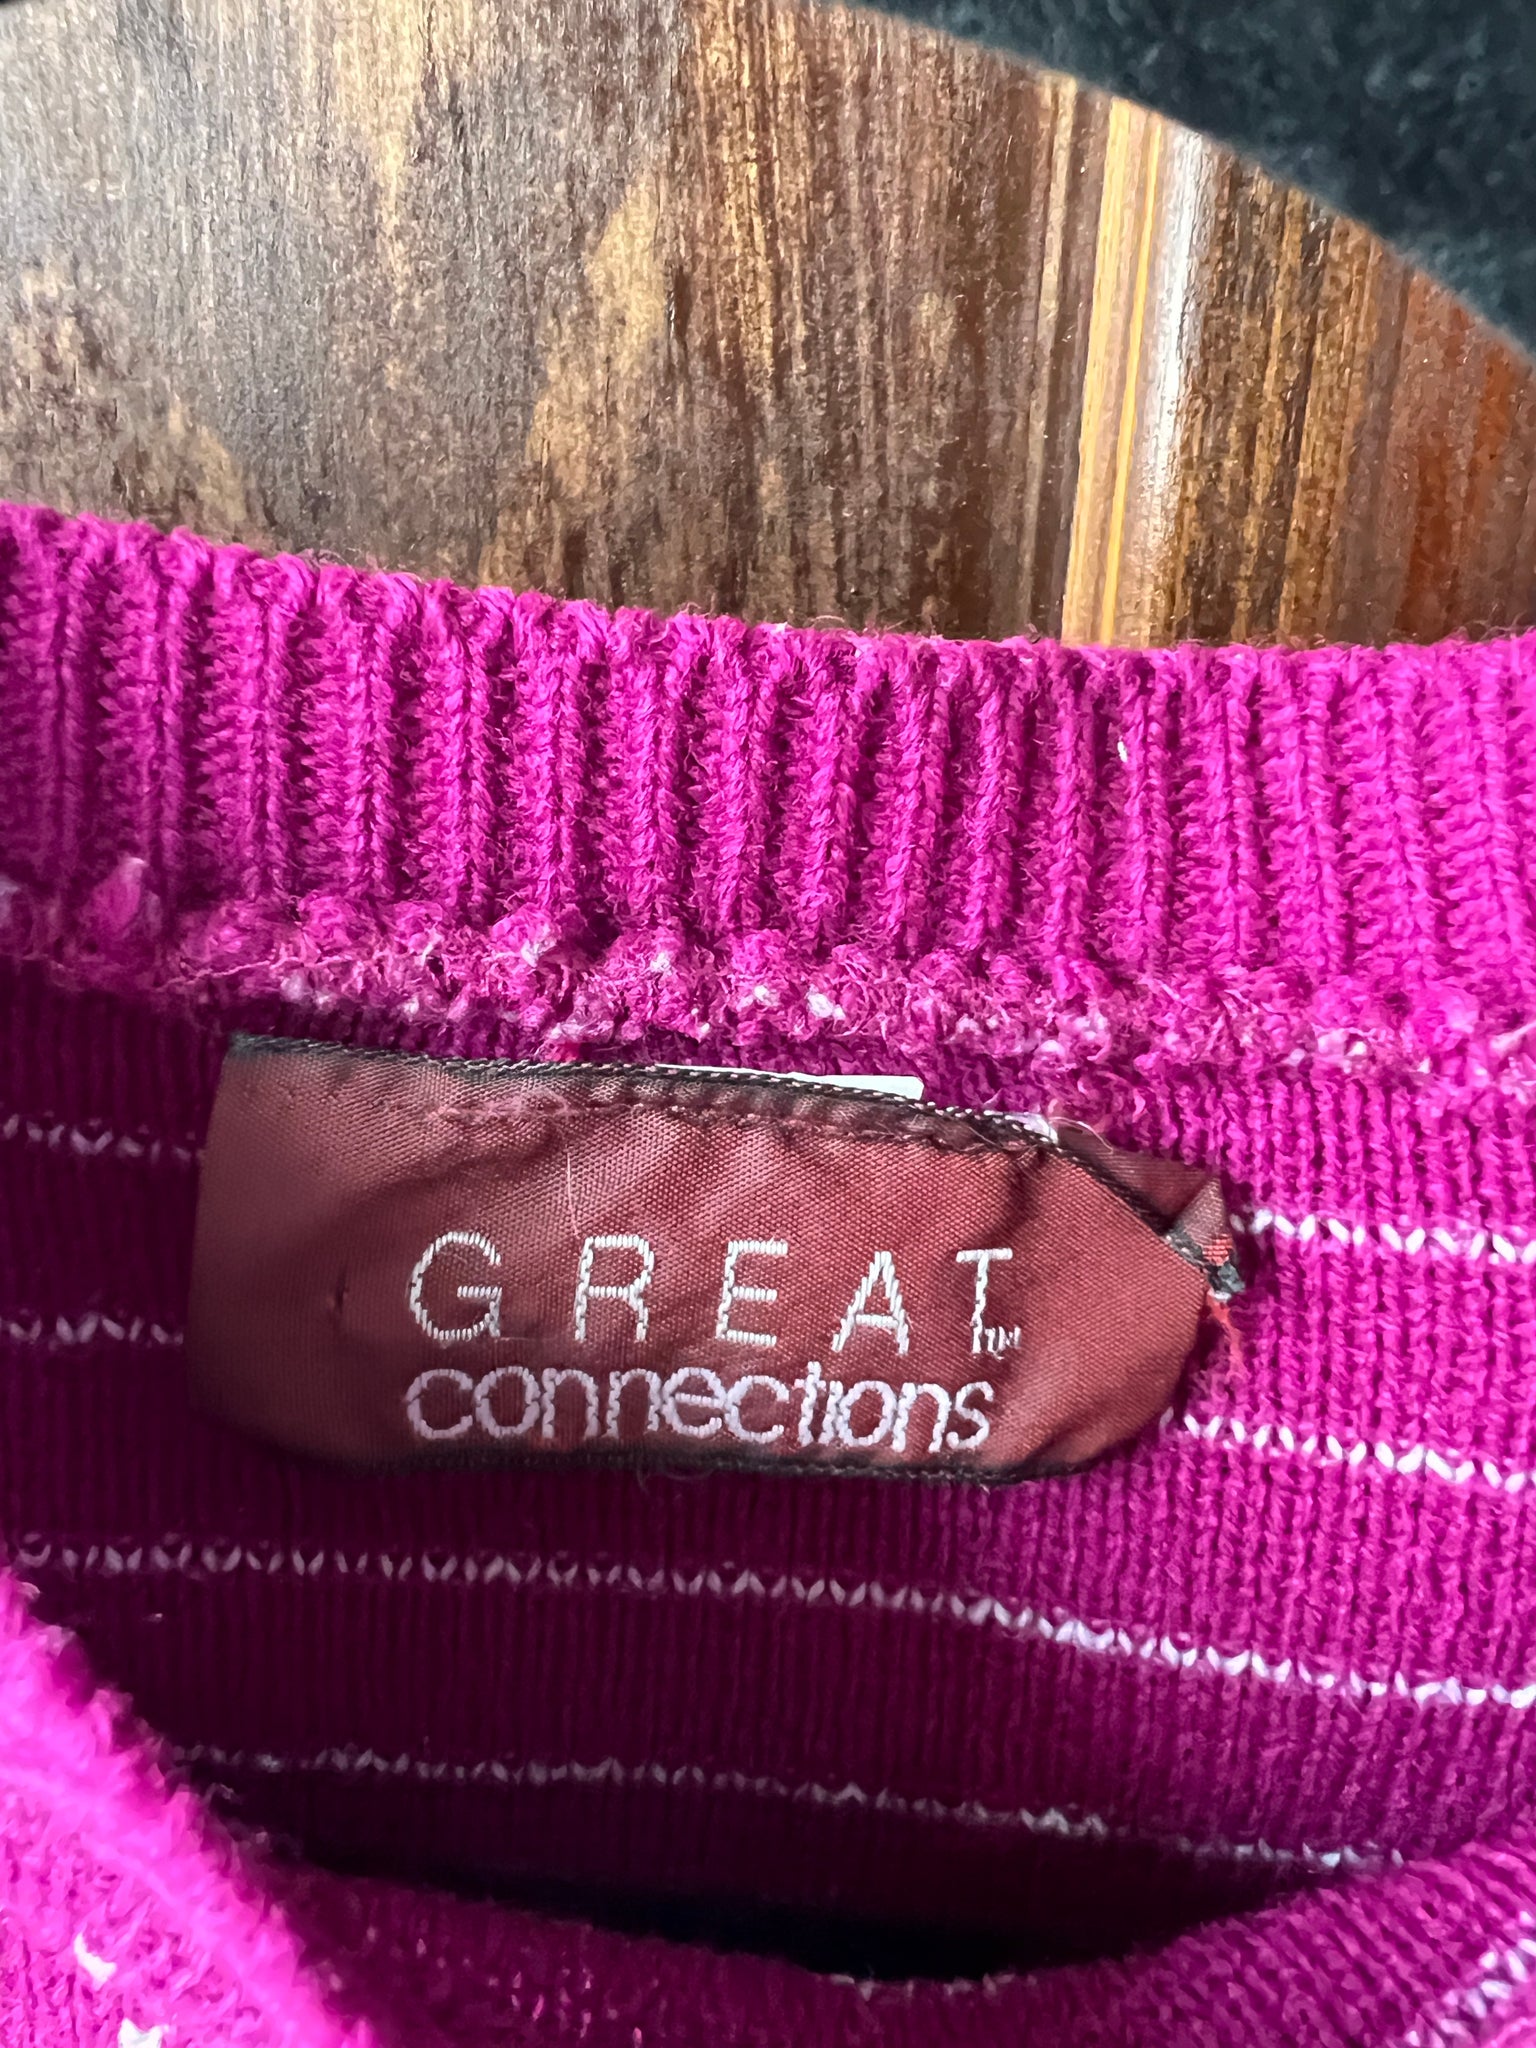 1980s SWEATER- Great Connections magenta polkadot